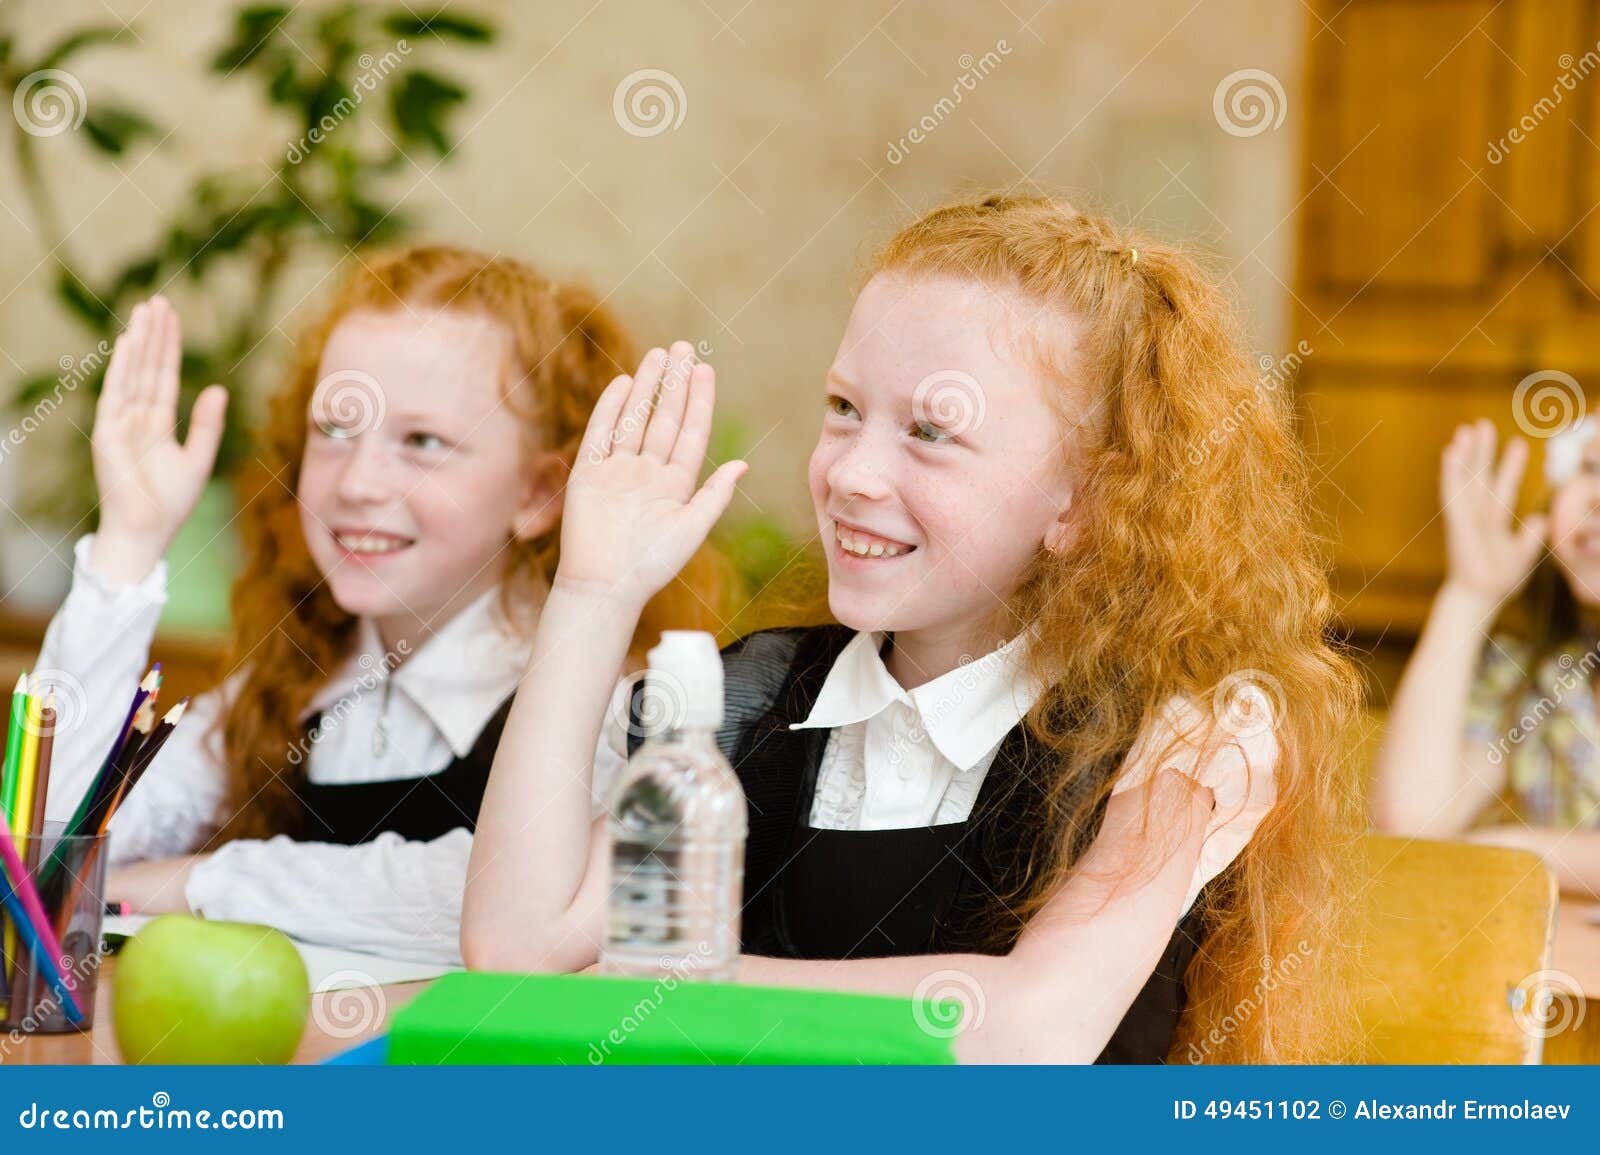 children raising hands knowing the answer to the question